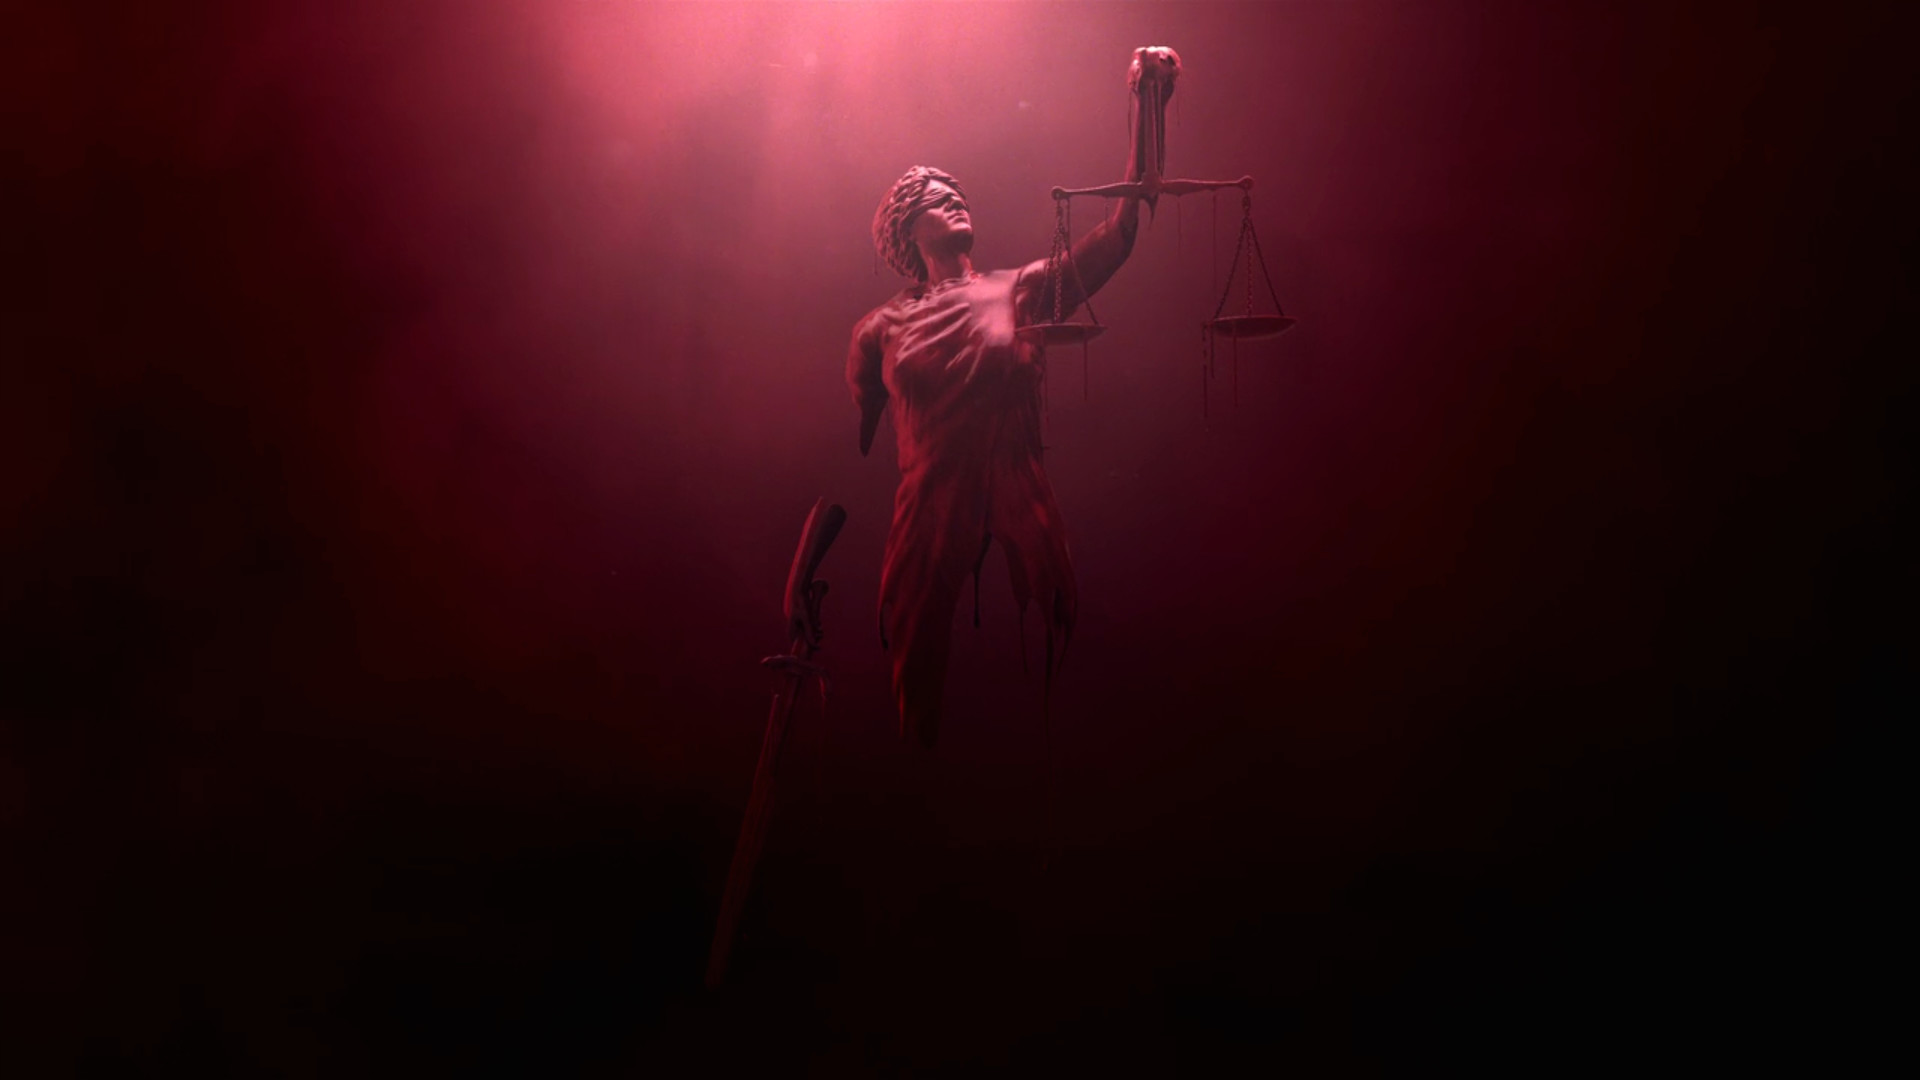 Here is another one someone else posted of the intro showing Lady Justice